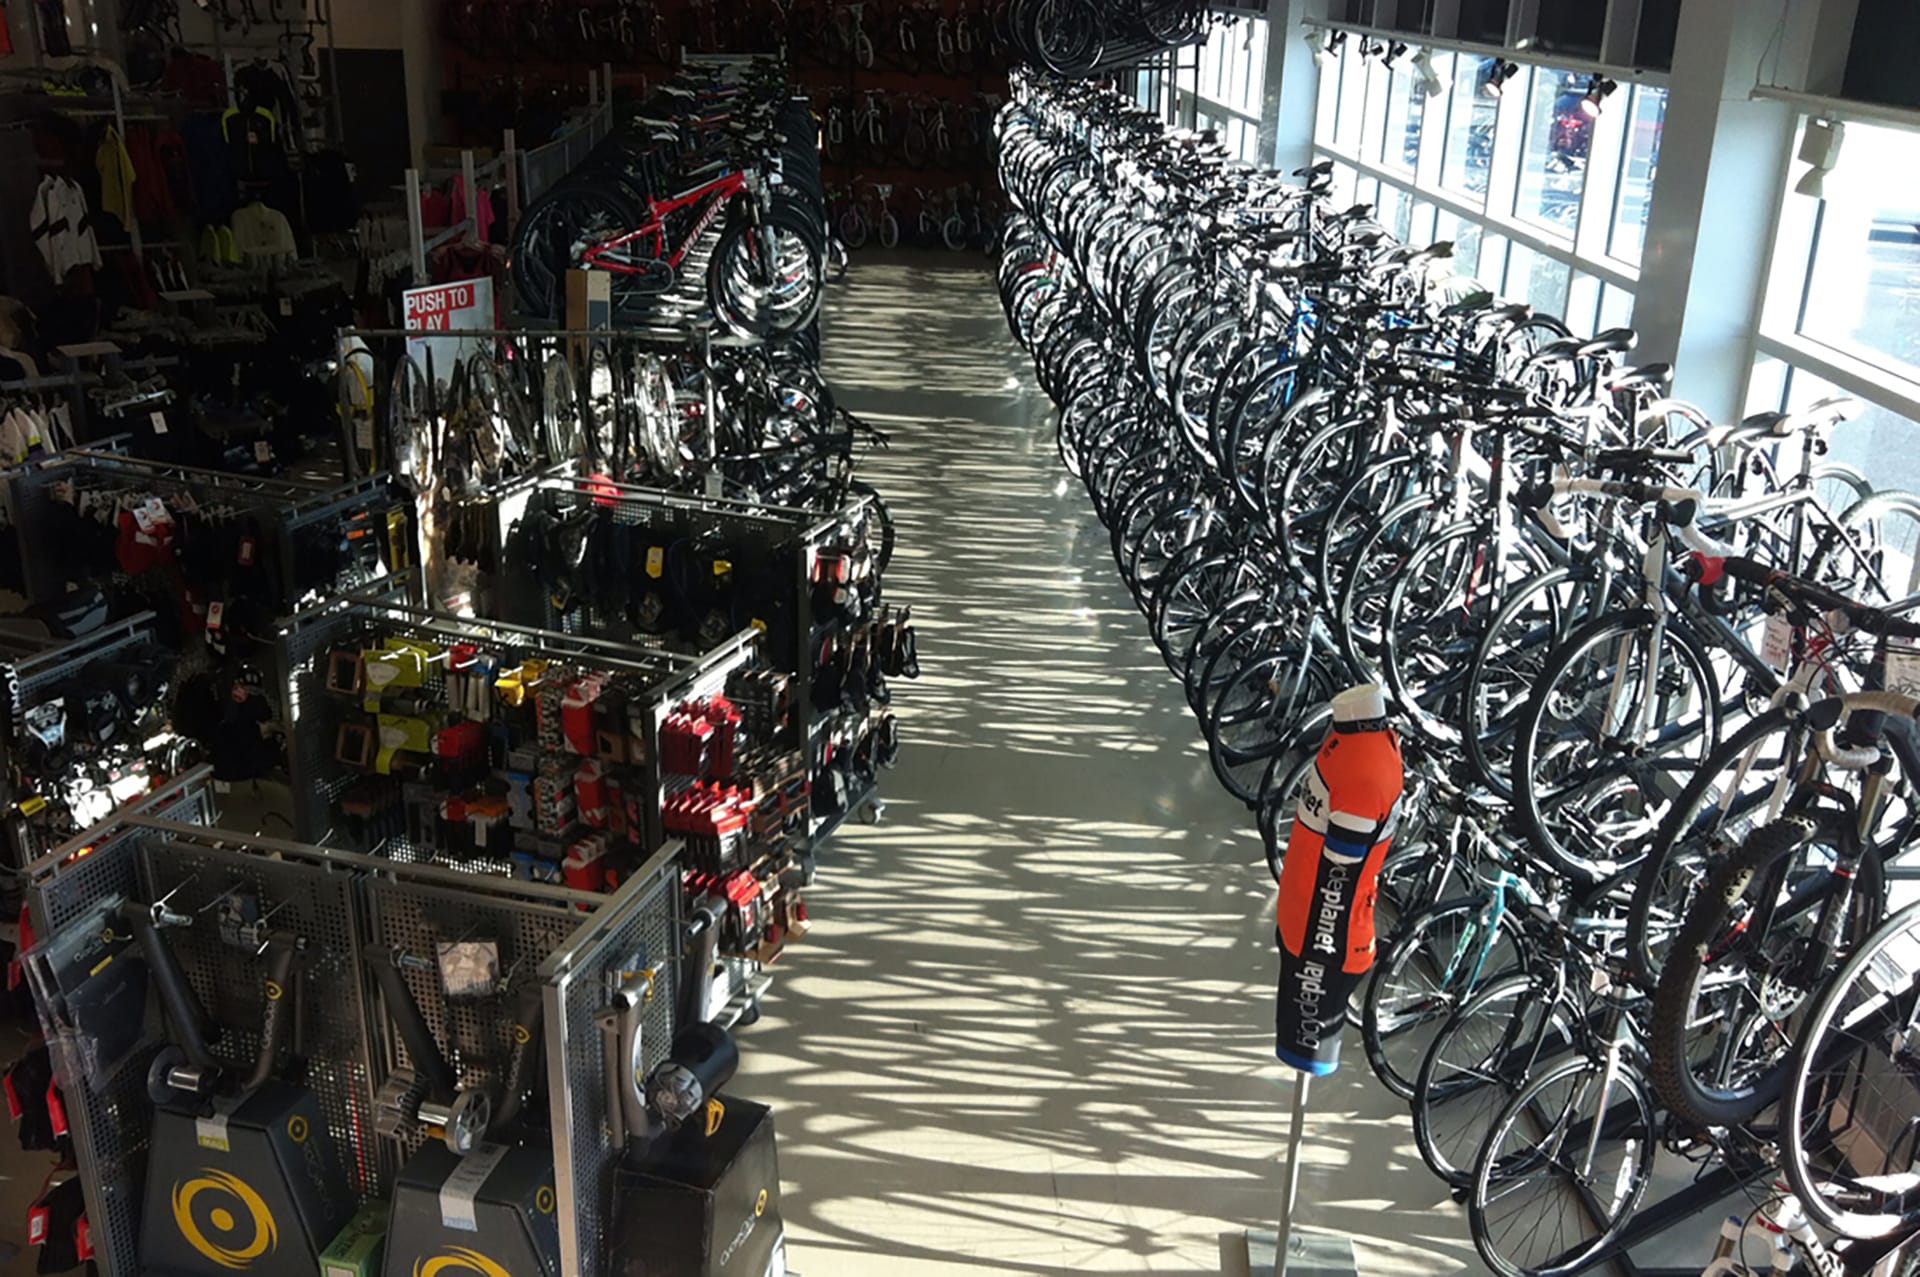 Looking down on the aisle of a bike shop, with two rows of bikes stacked on top of each other.